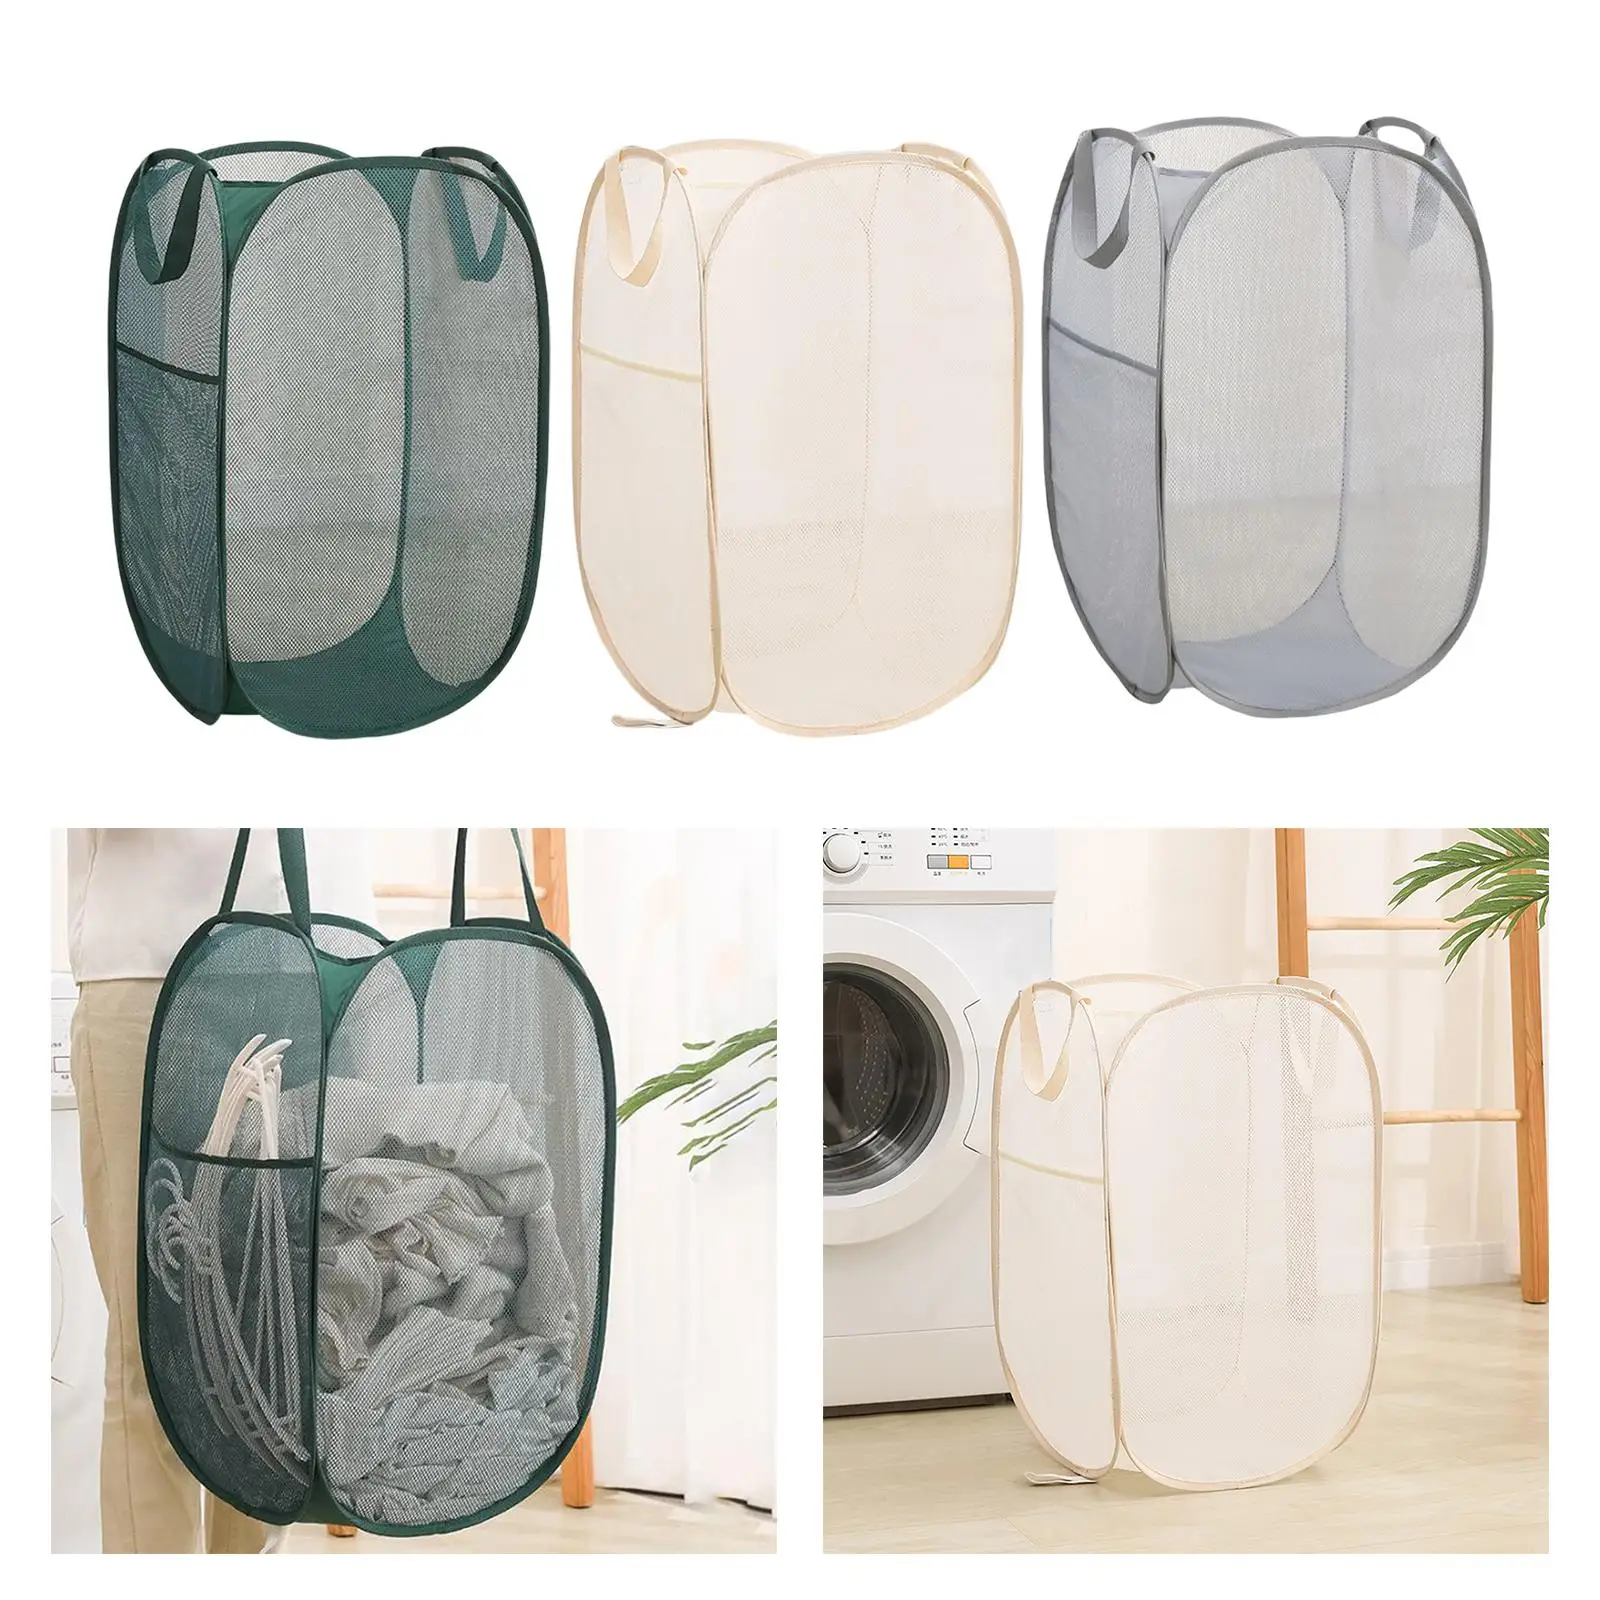 Foldable Toy Storage Basket Large Portable Dirty Clothes Bag Storage Bins Laundry Storage Basket for Dormitory Home Bedroom